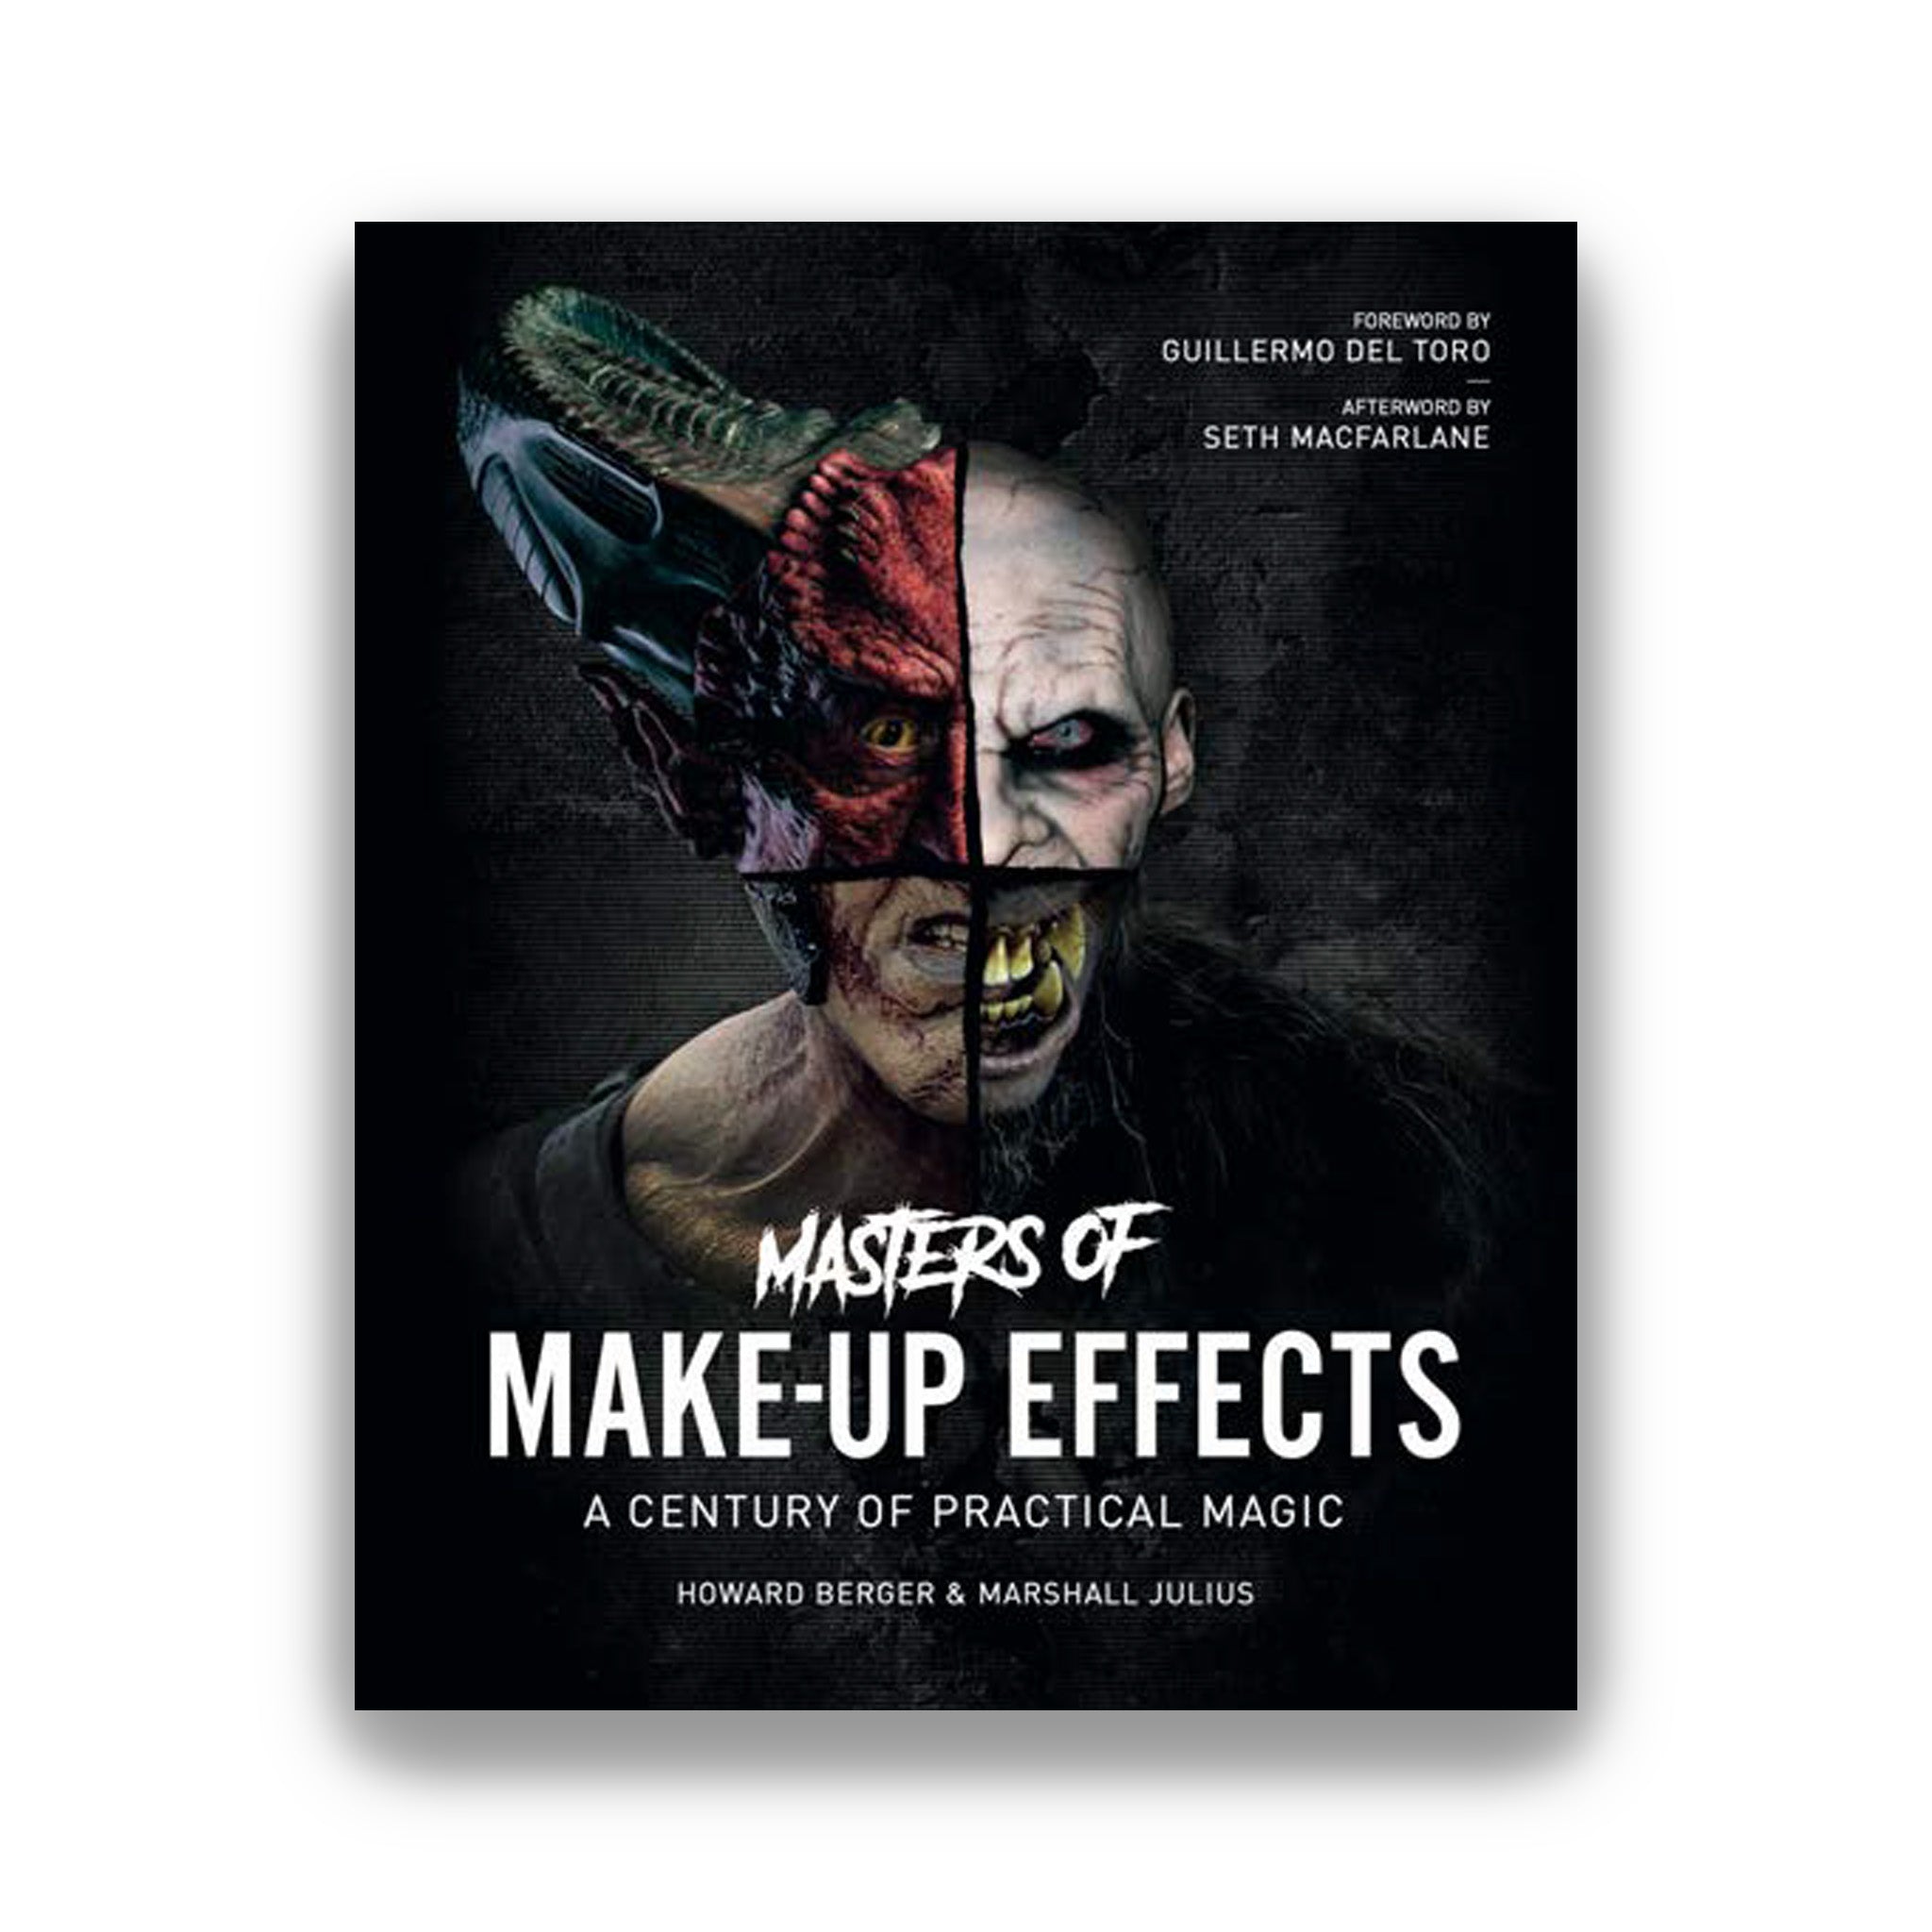 MASTERS OF MAKE-UP EFFECTS